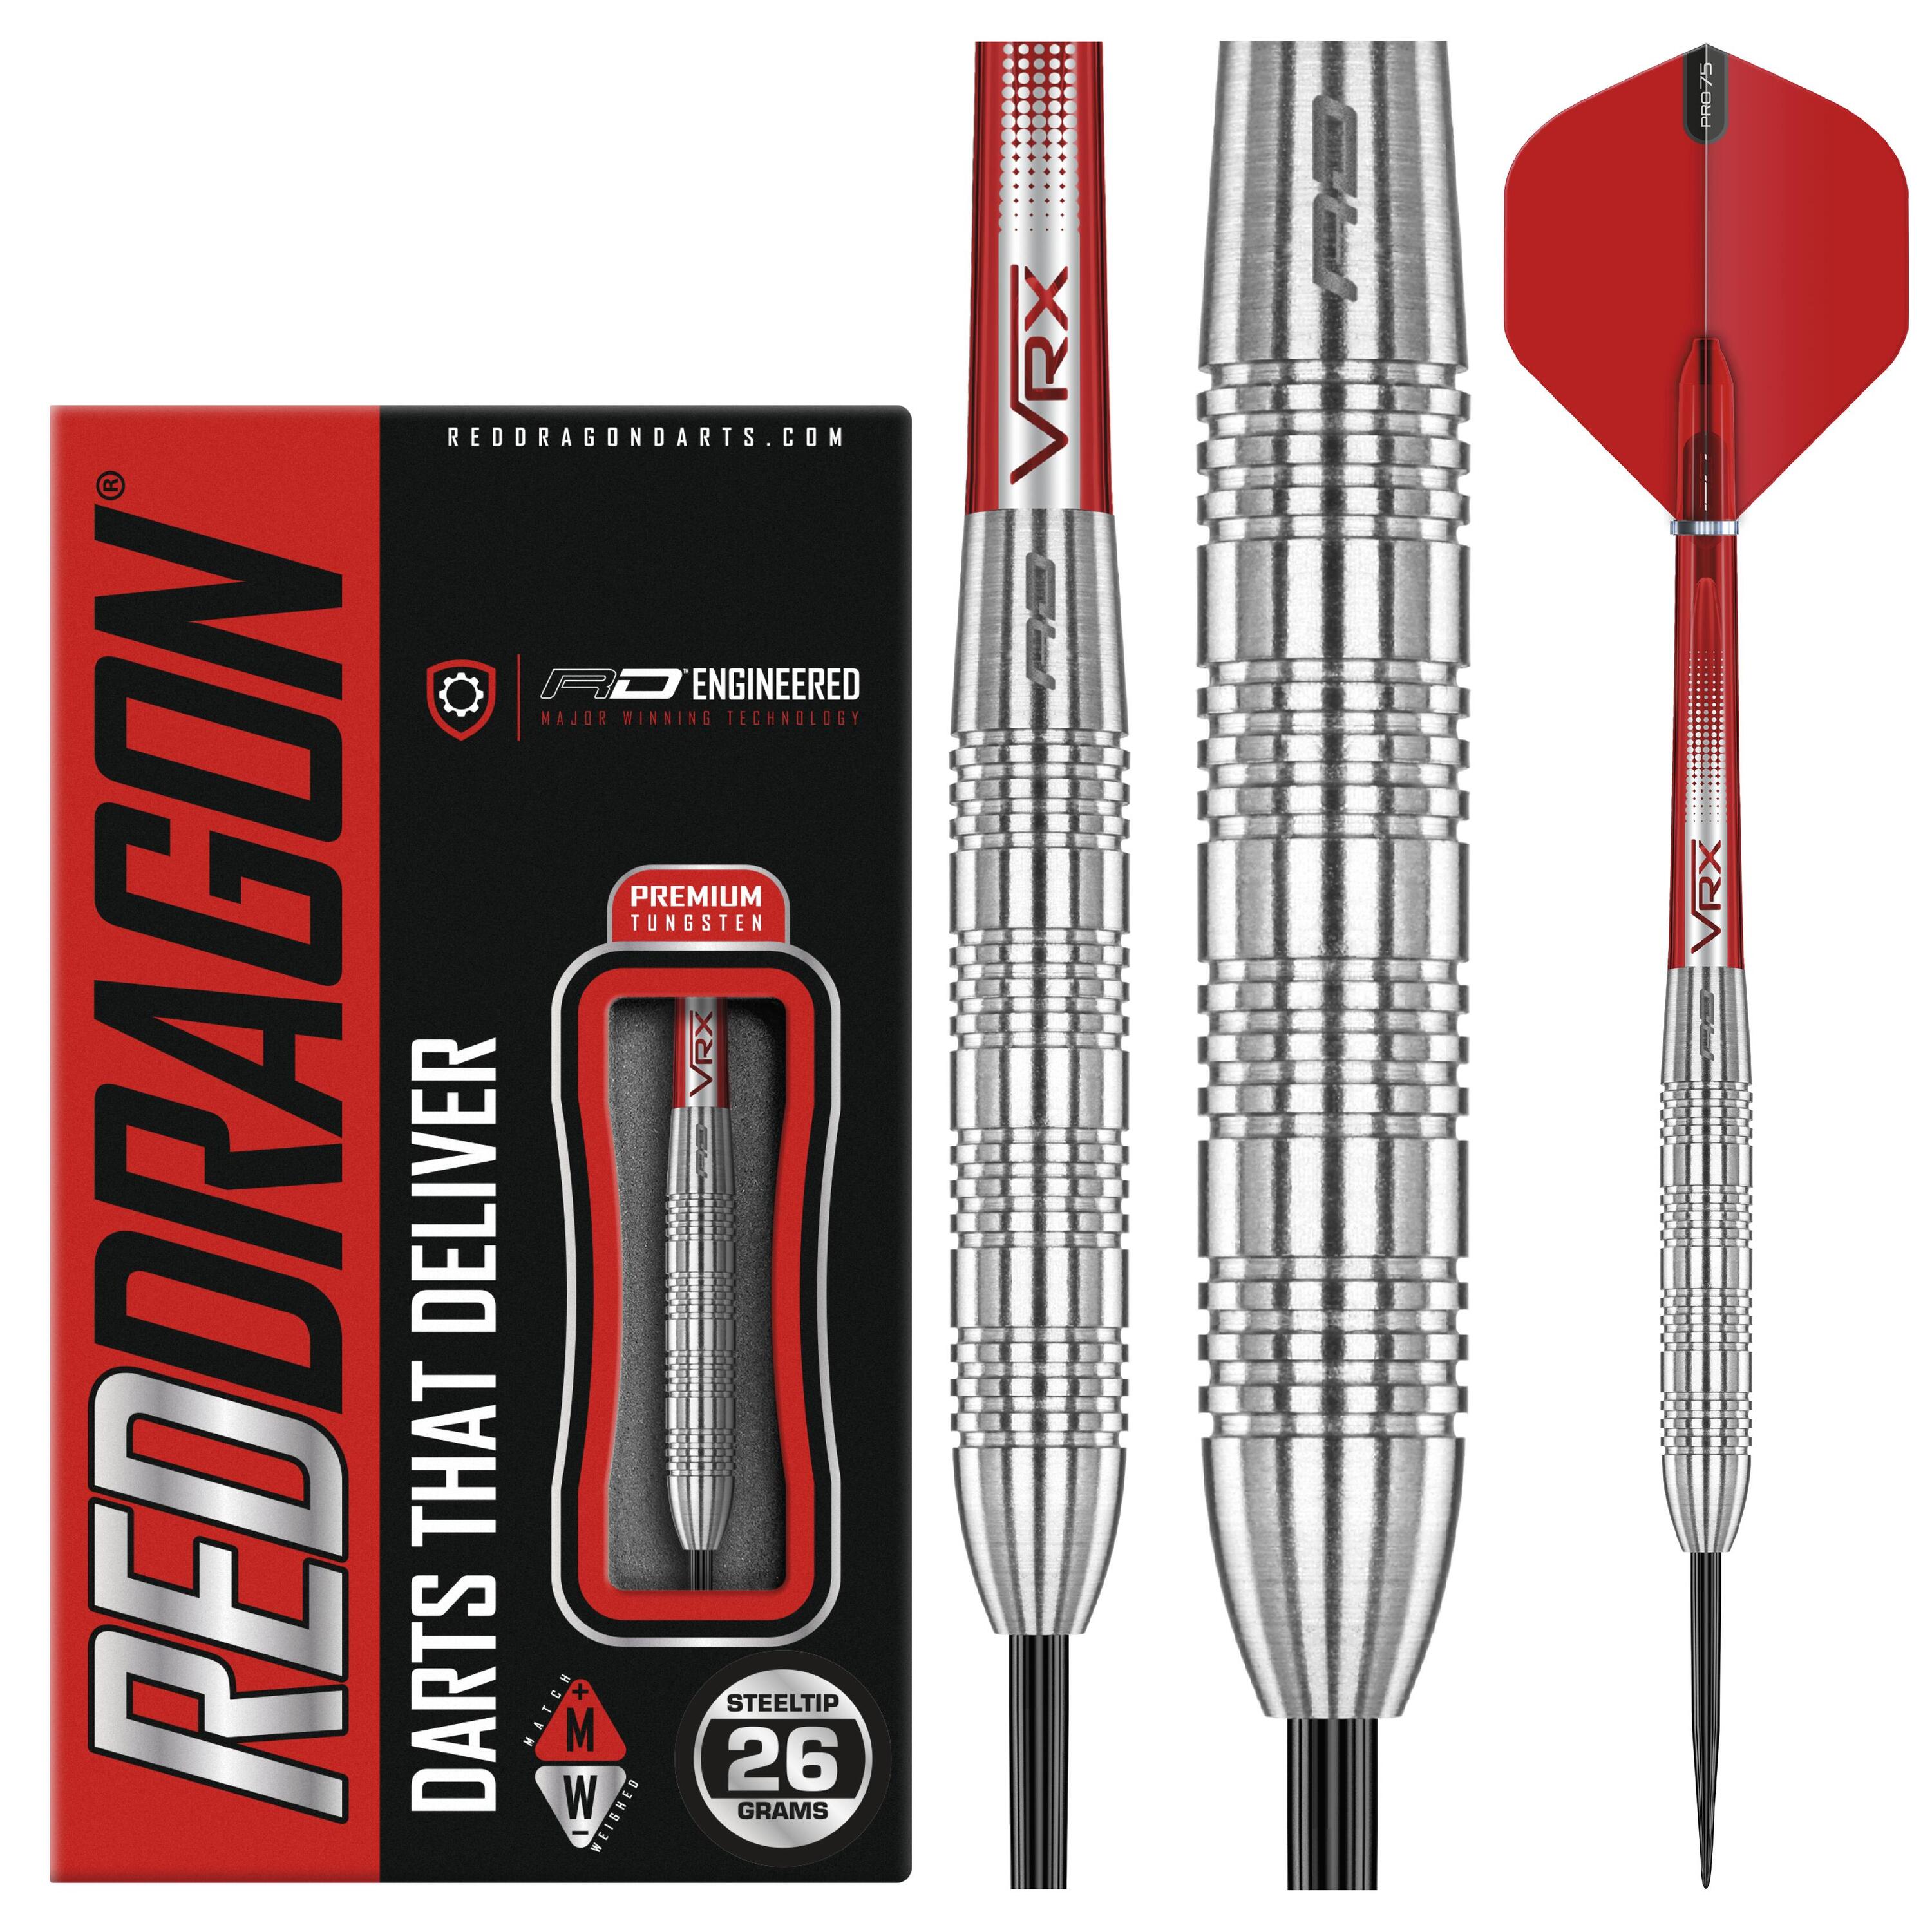 RED DRAGON Hell Fire B 26 gram Tungsten Darts Set with Flights and Stems 1/5